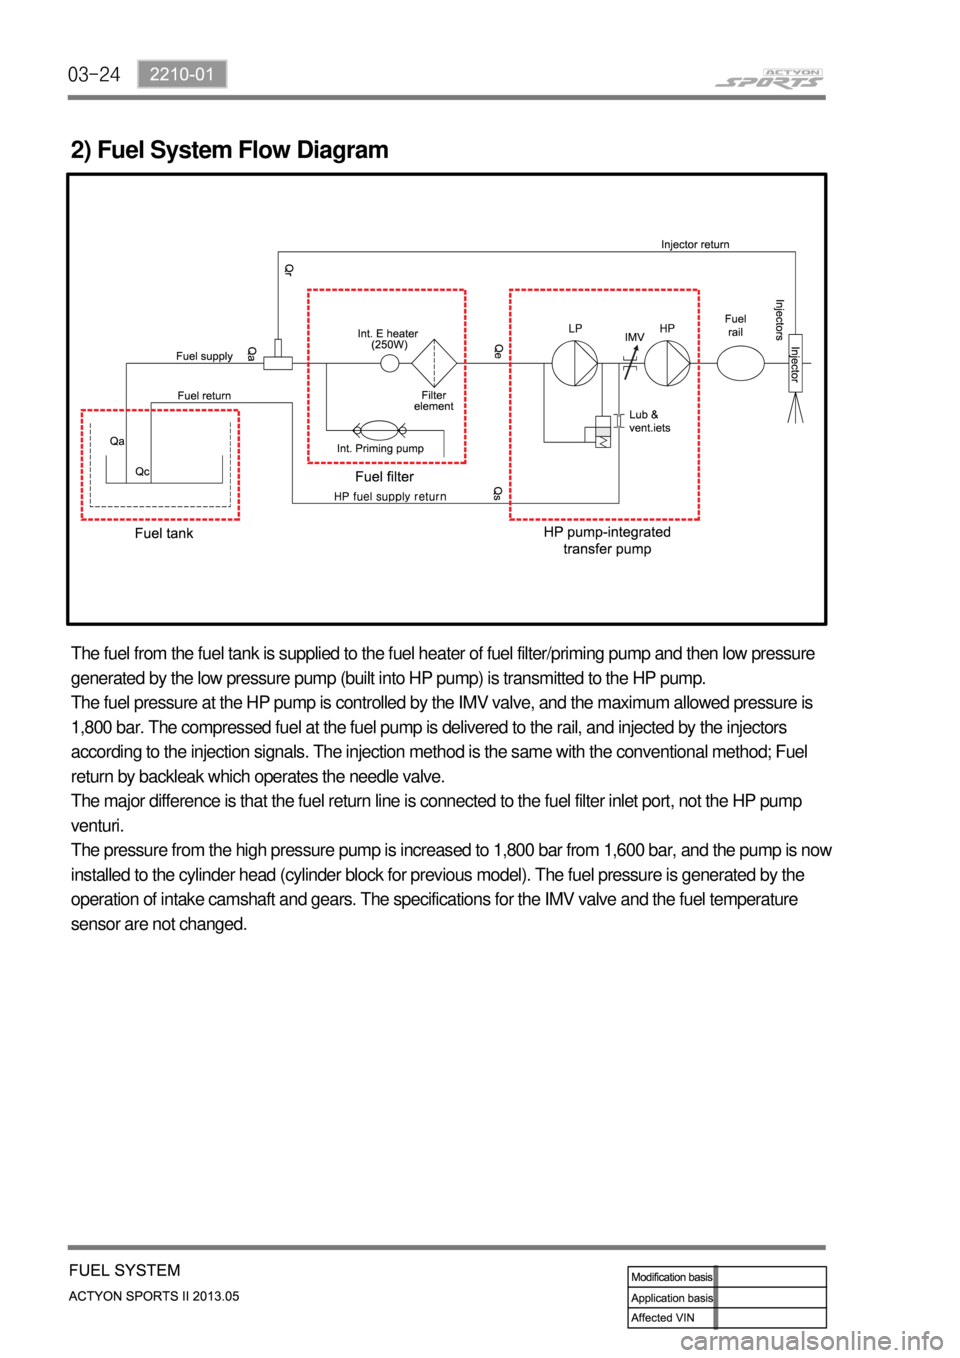 SSANGYONG NEW ACTYON SPORTS 2013  Service Manual 03-24
2) Fuel System Flow Diagram
The fuel from the fuel tank is supplied to the fuel heater of fuel filter/priming pump and then low pressure 
generated by the low pressure pump (built into HP pump) 